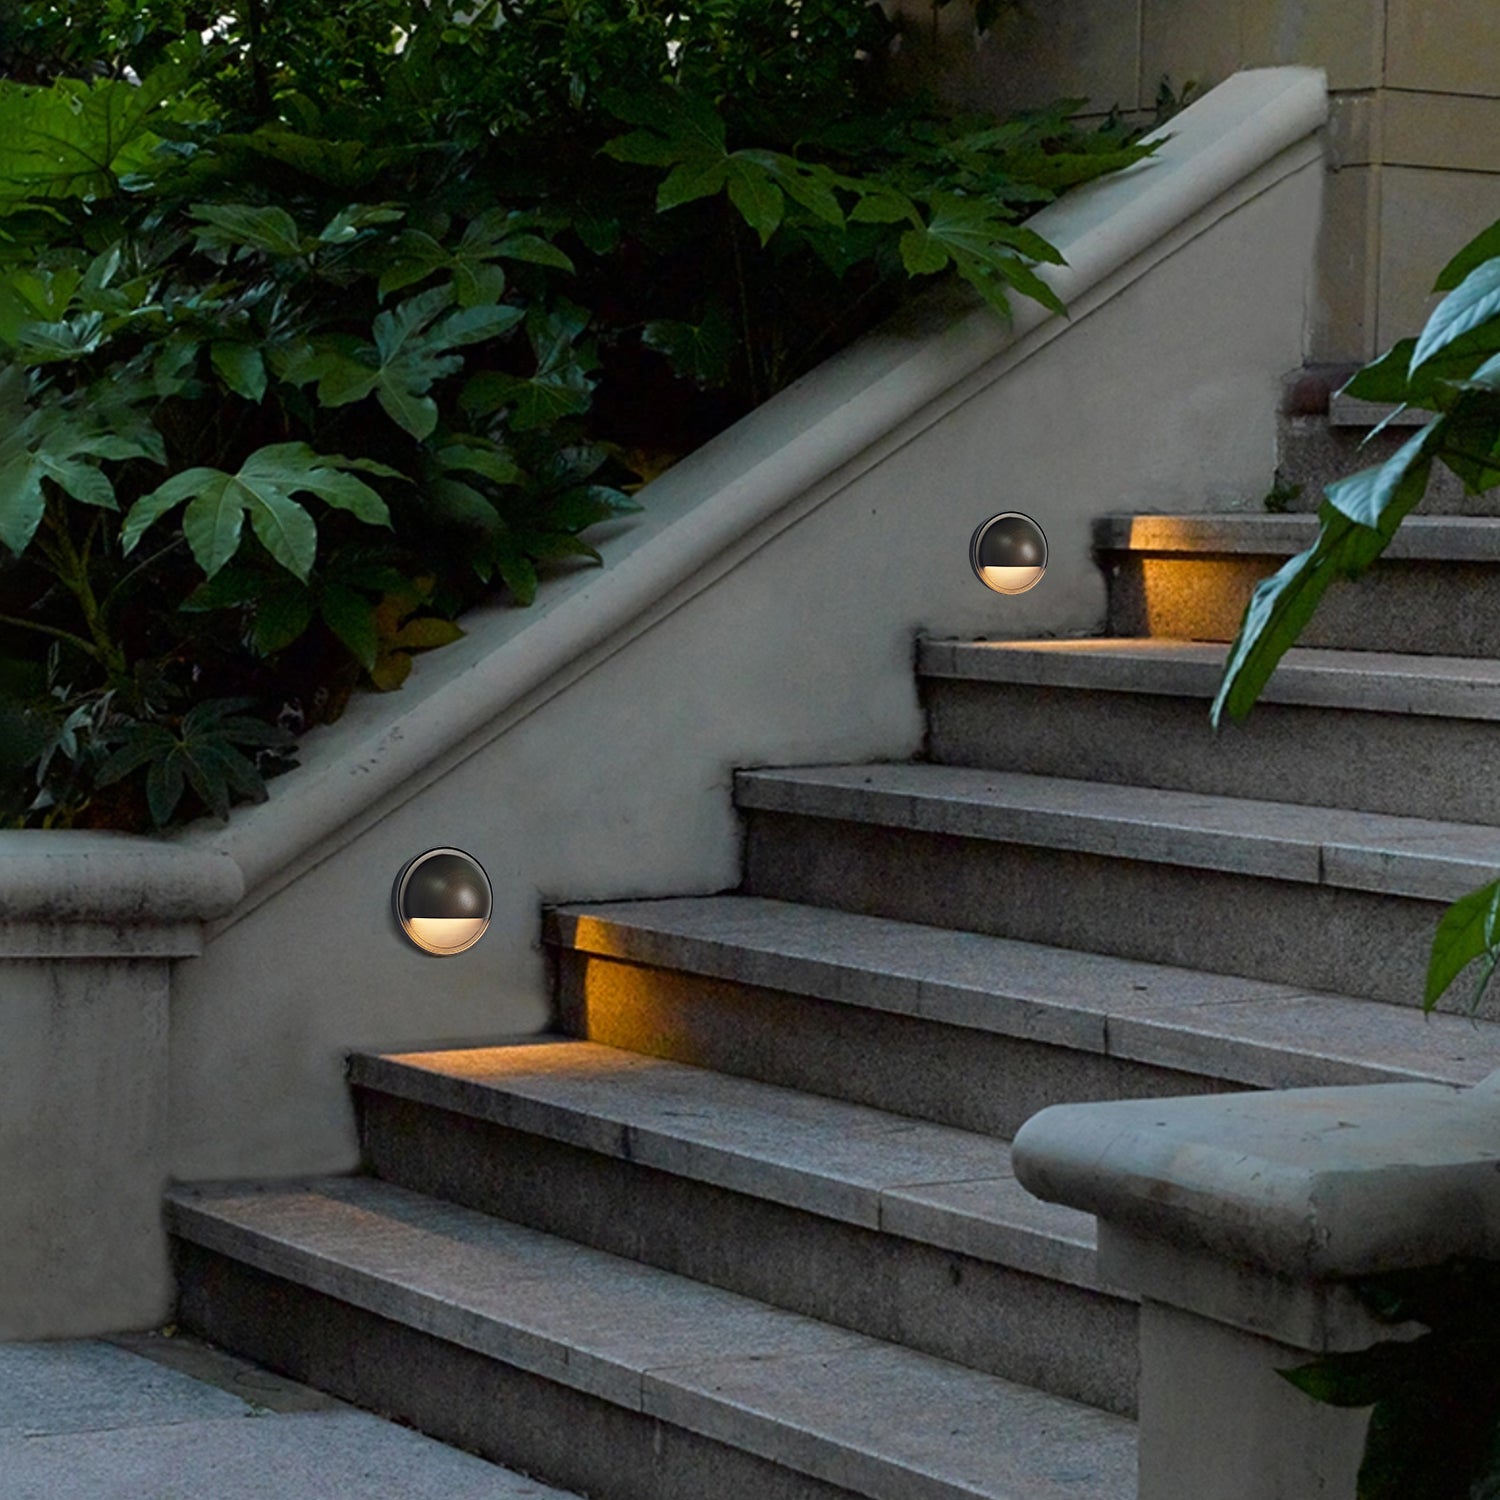 Low voltage LED brass deck lights illuminating outdoor steps, enhancing safety and aesthetics with durable, energy-efficient lighting.